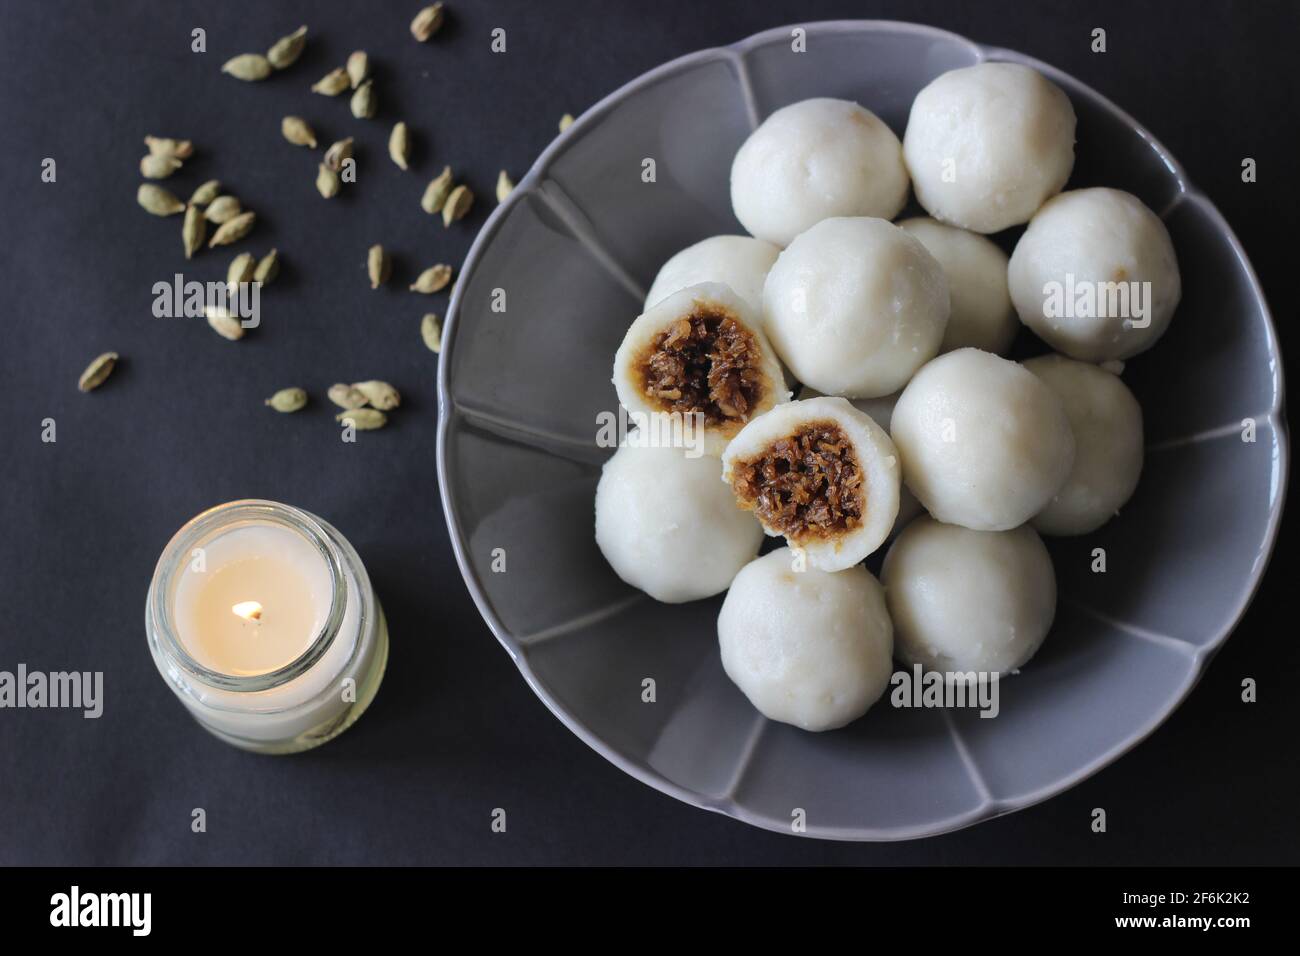 Steamed dumplings made with rice flour dough and stuffed with a filling of coconut and jaggery prepared by Kerala Christians on easter Saturday Stock Photo